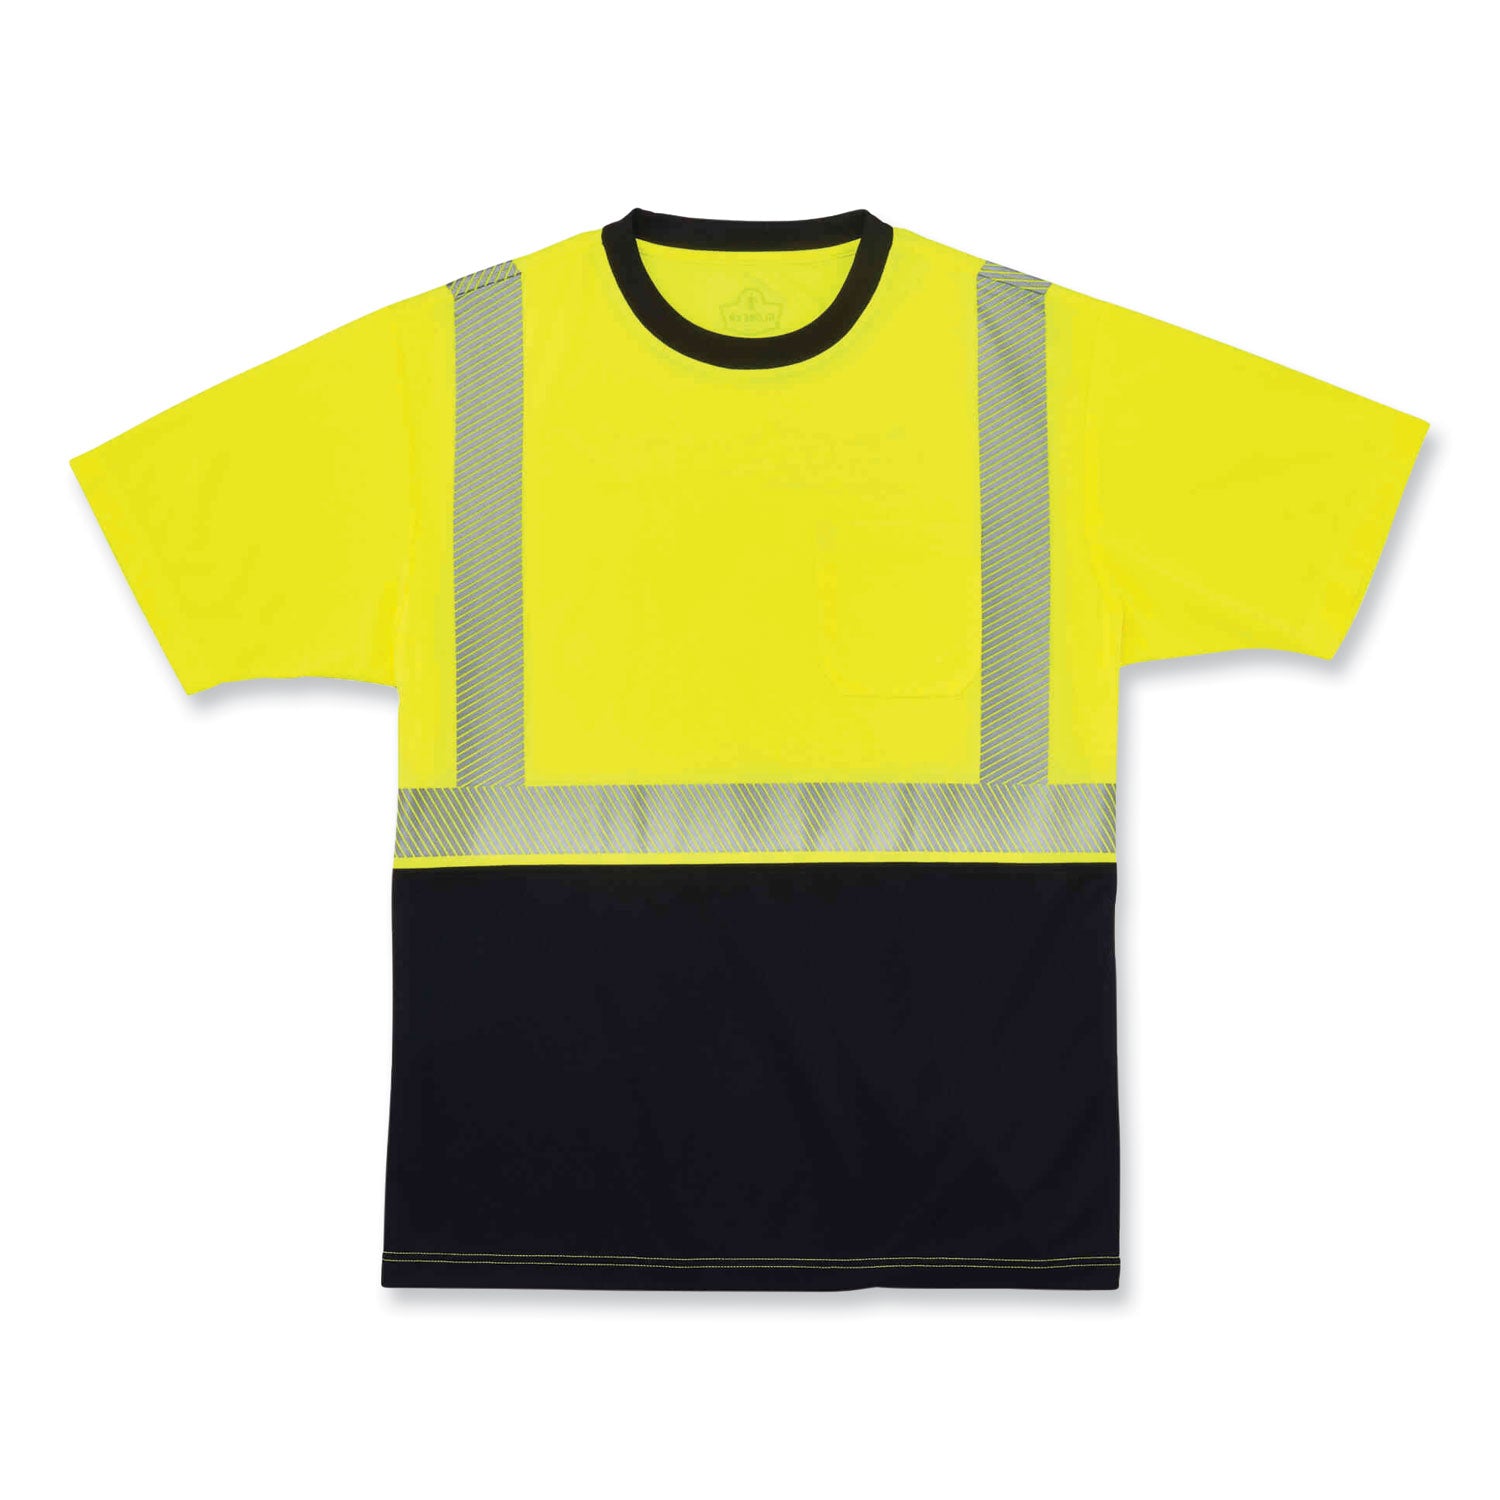 glowear-8280bk-class-2-performance-t-shirt-with-black-bottom-polyester-2x-large-lime-ships-in-1-3-business-days_ego22536 - 1